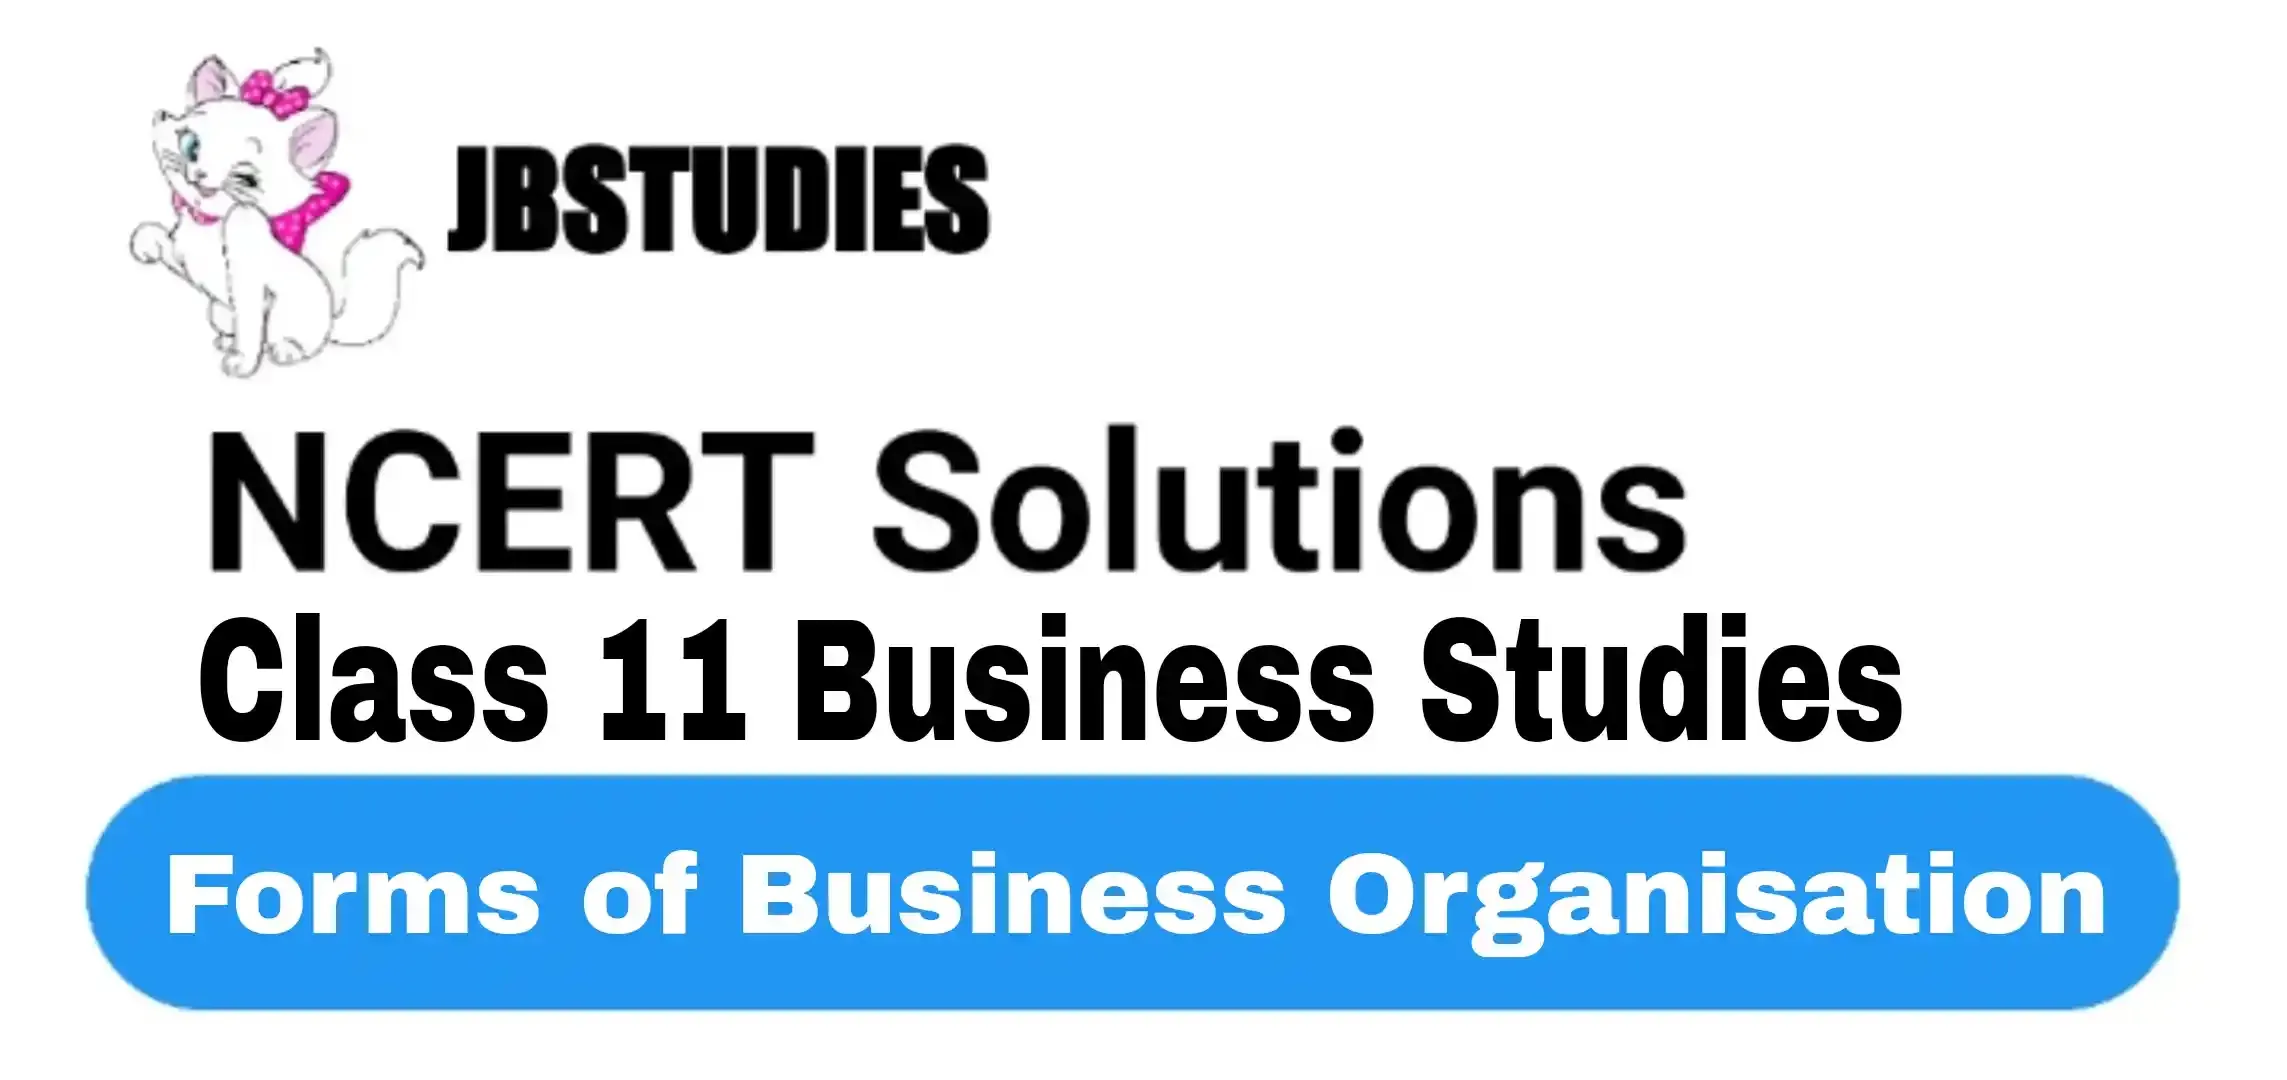 Solutions Class 11 Business Studies Chapter -2 (Forms of Business Organisation)